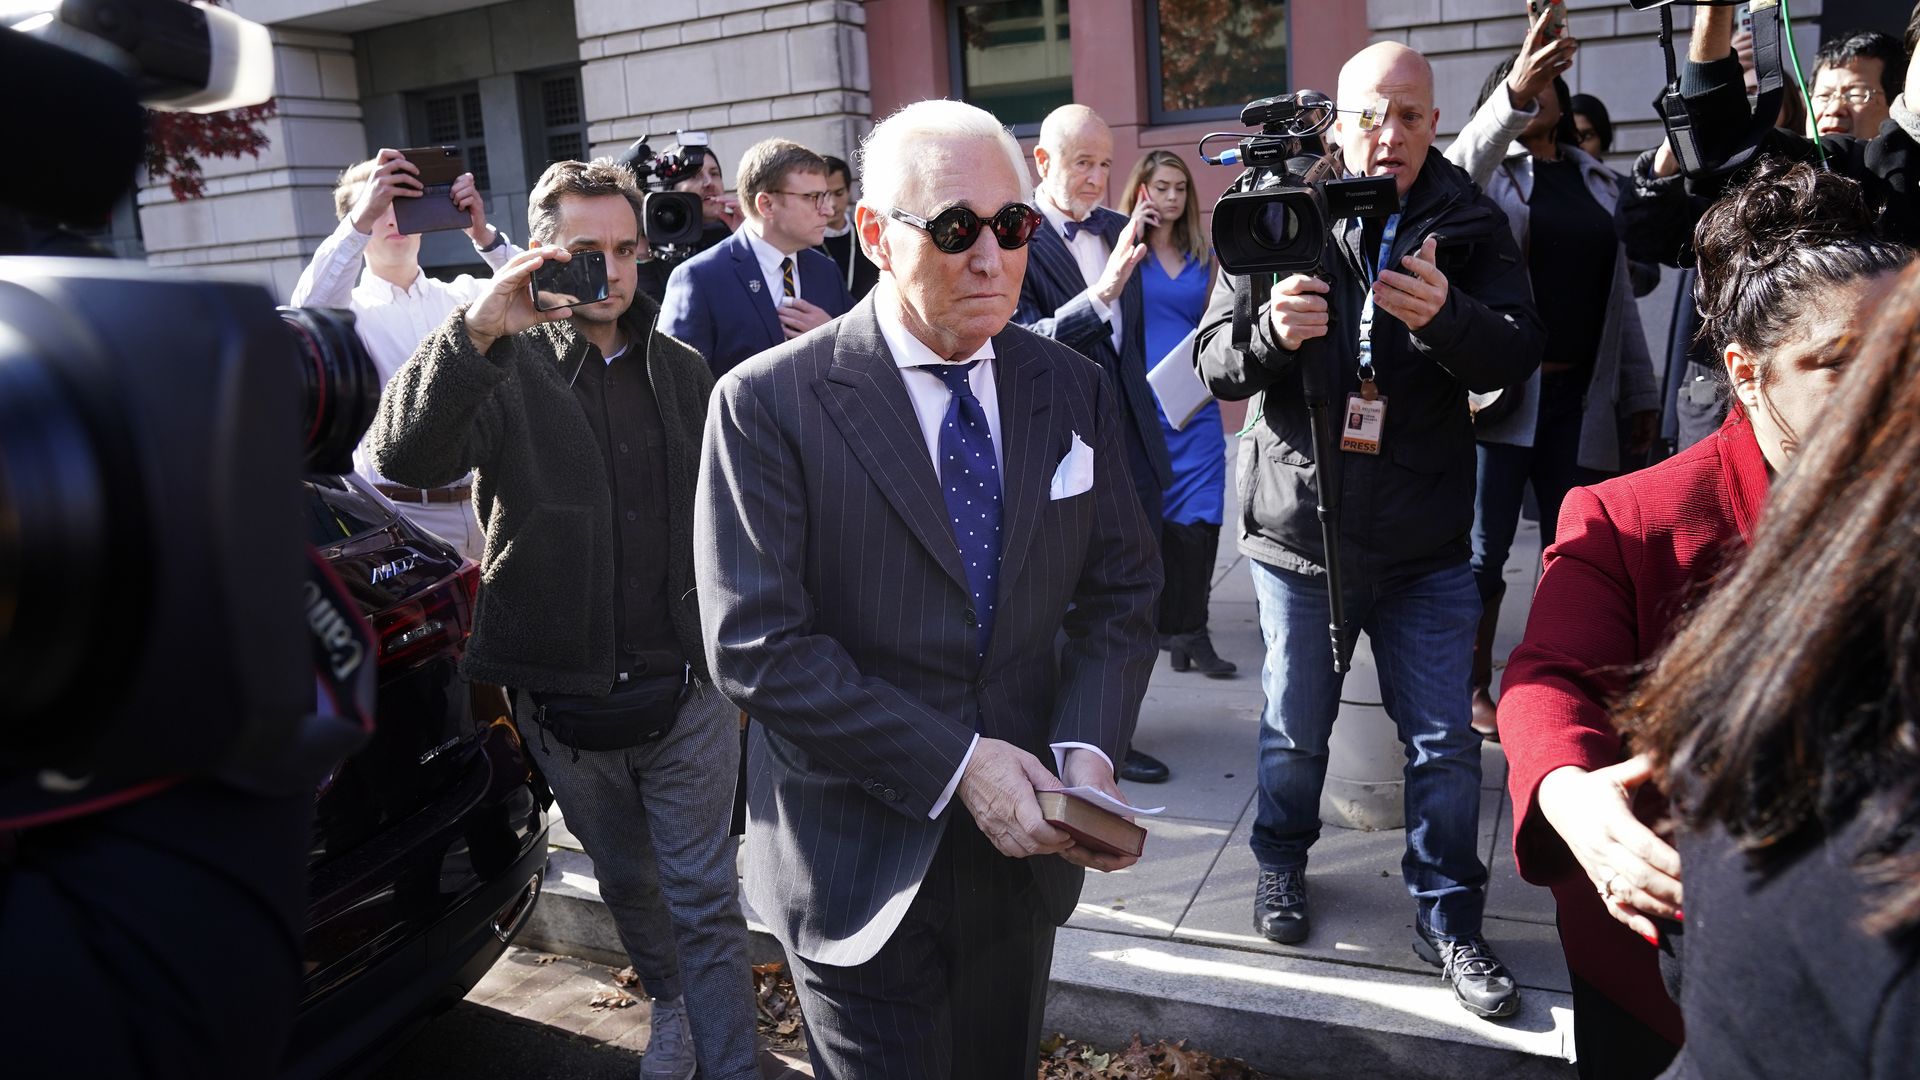 Roger Stone walking out of the courthouse after being found guilty.